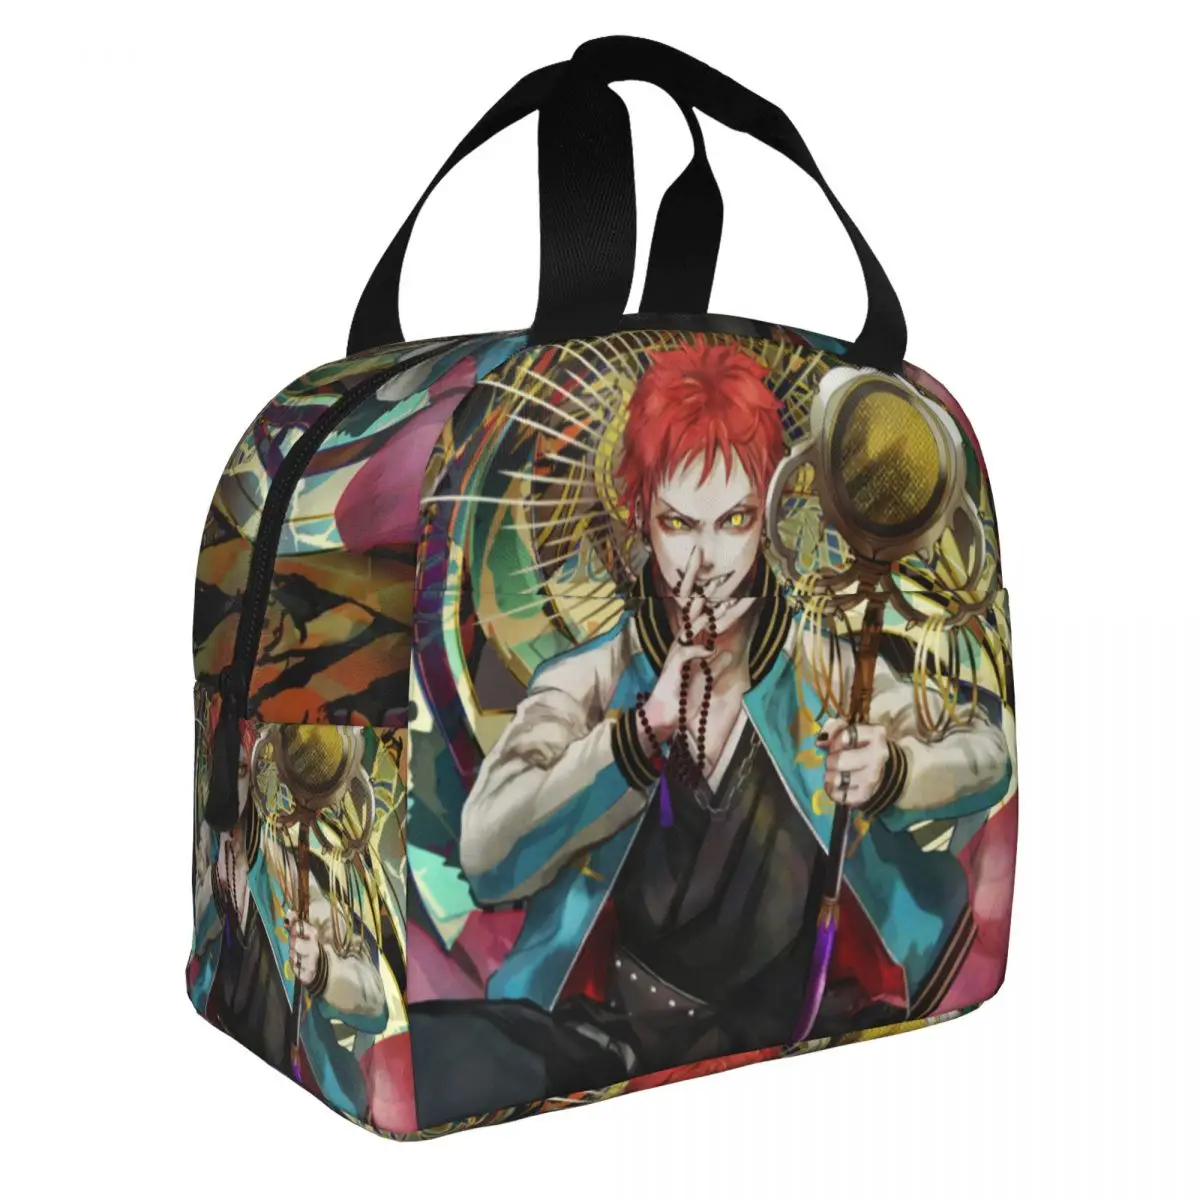 Kuko Harai Hypnosis Mic Lunch Bento Bags Portable Aluminum Foil thickened Thermal Cloth Lunch Bag for Women Men Boy